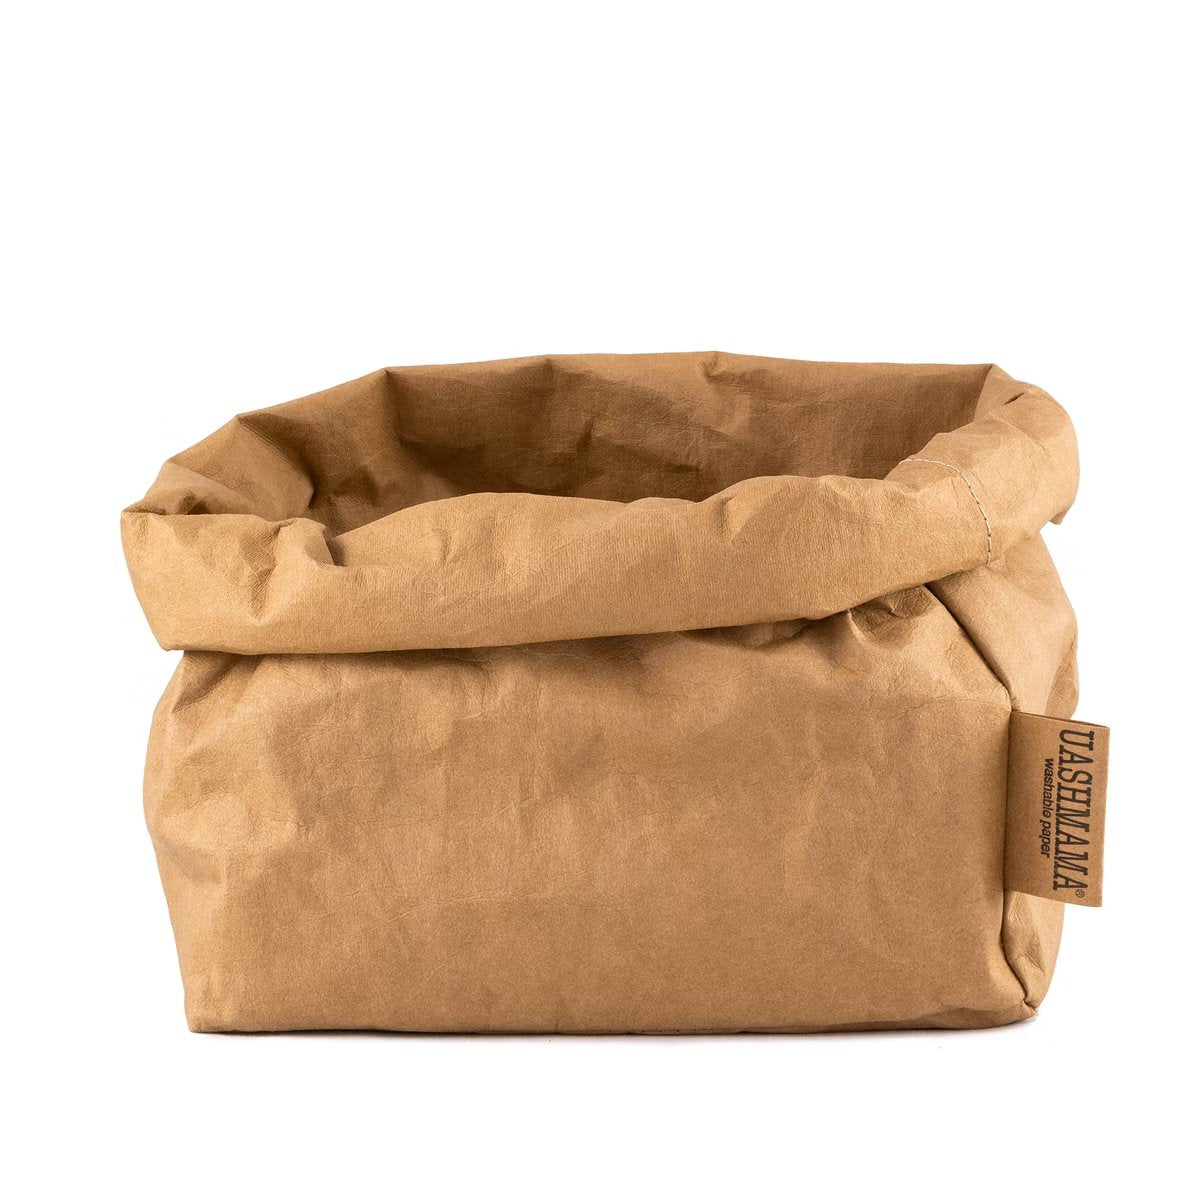 A washable paper bag is shown. The bag is rolled down at the top and features a UASHMAMA logo label on the bottom left corner. The bag pictured is the large size in tan.